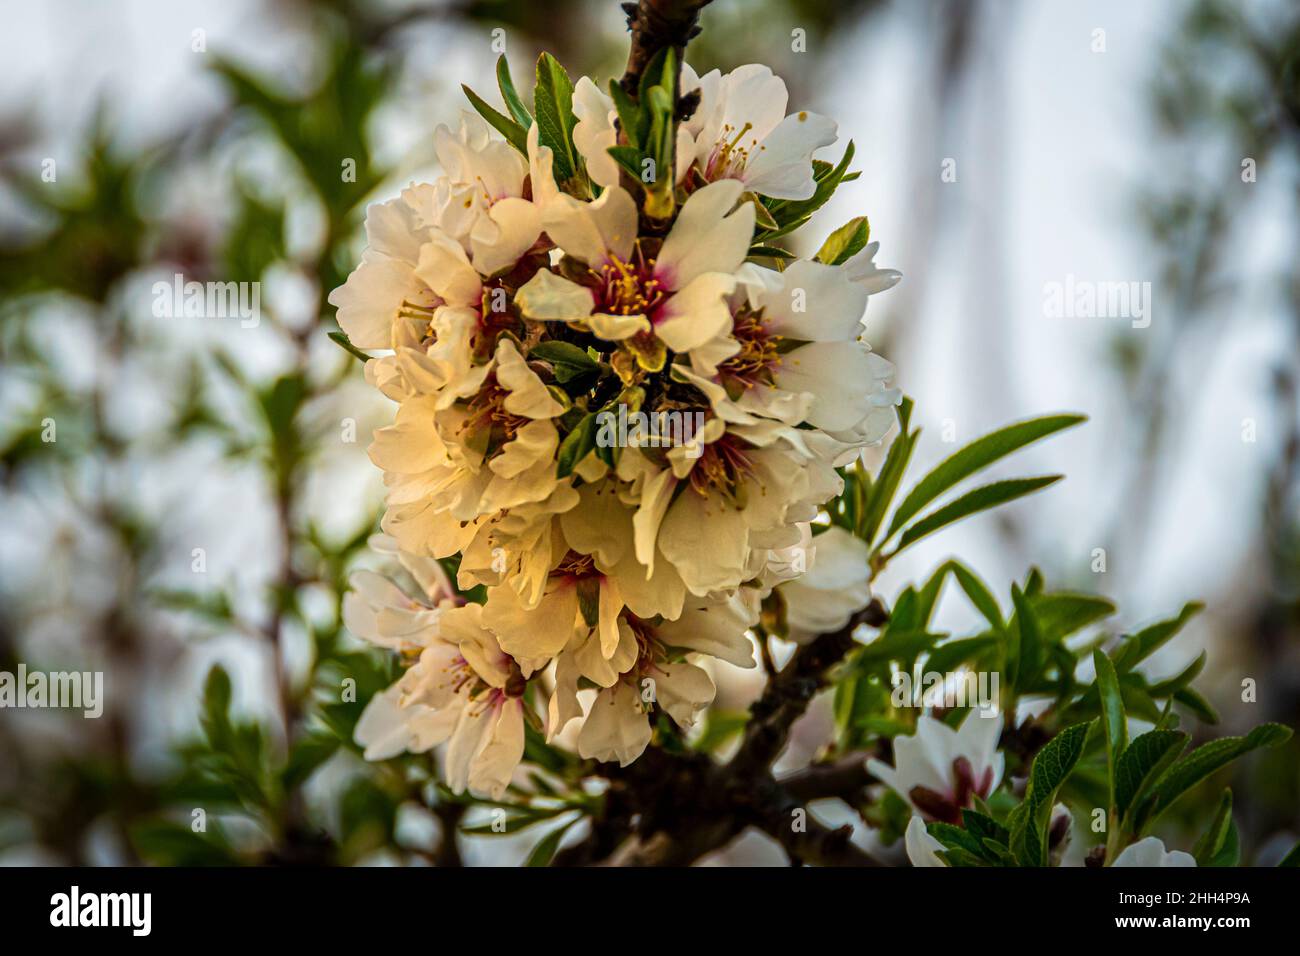 close up bouquet of whitish pink peach blossoms Stock Photo